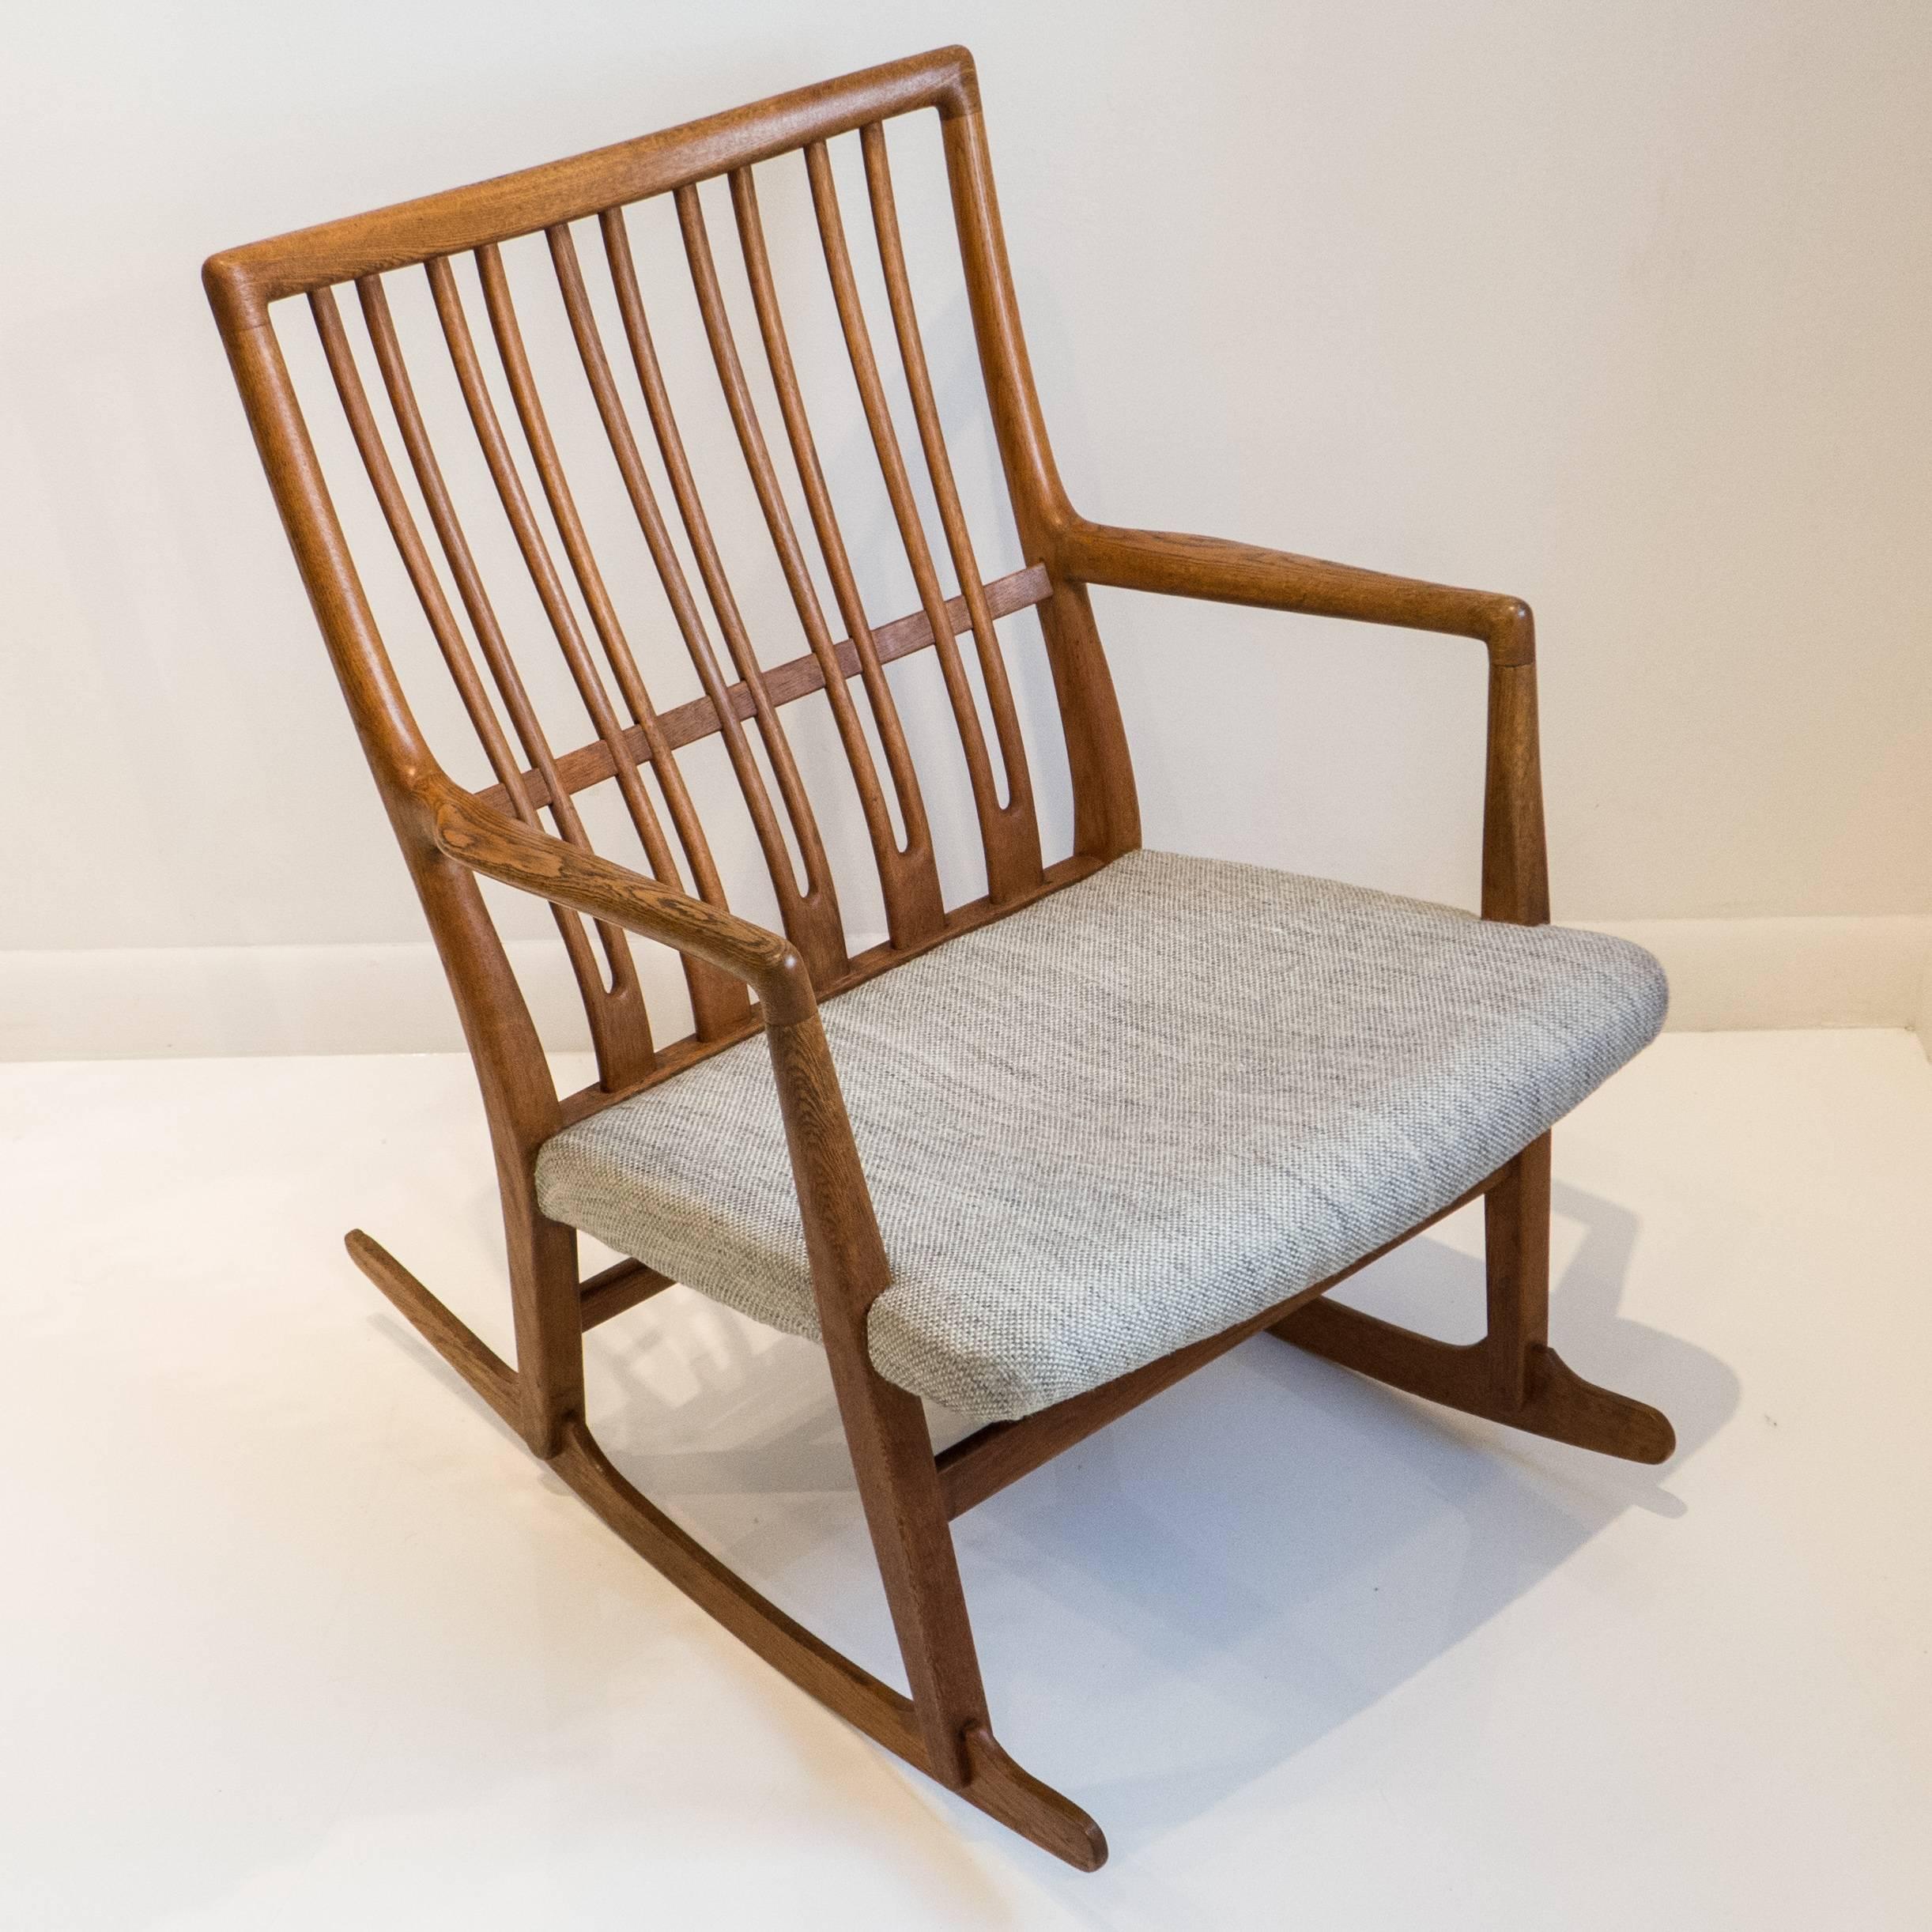 Oak rocking chair with vintage but not original wool fabric seat. An early (1942) Hans Wegner design produced by Mikael Laursen, circa 1960s. Note: Often attributed online to a 1940s production date, the rocker was still in the Illums Bolighus